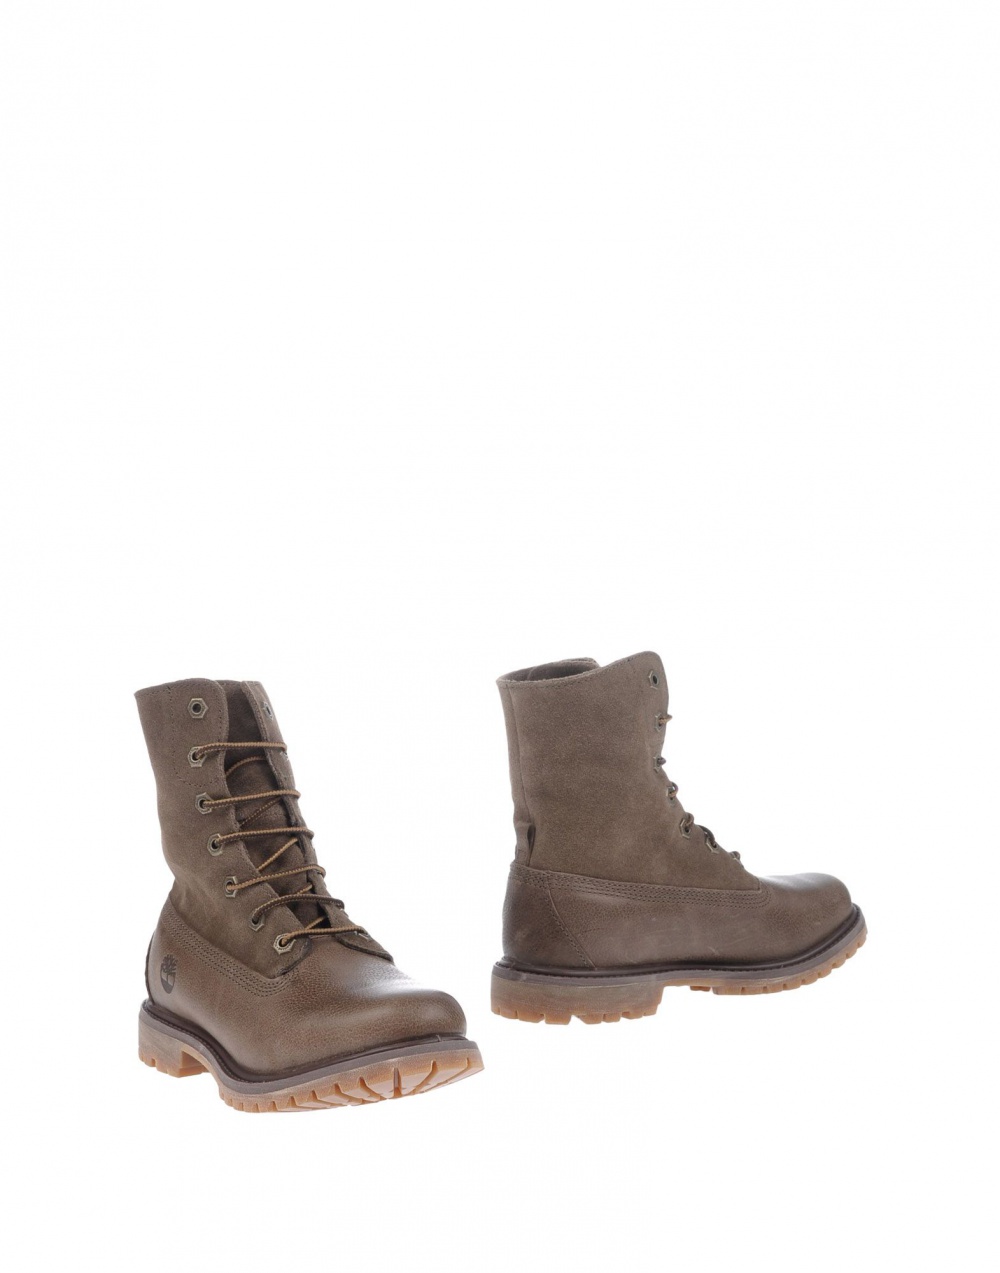 Timberland Authentics Suede Roll-Top Boots на 37 р-р(стелька 24,2см)